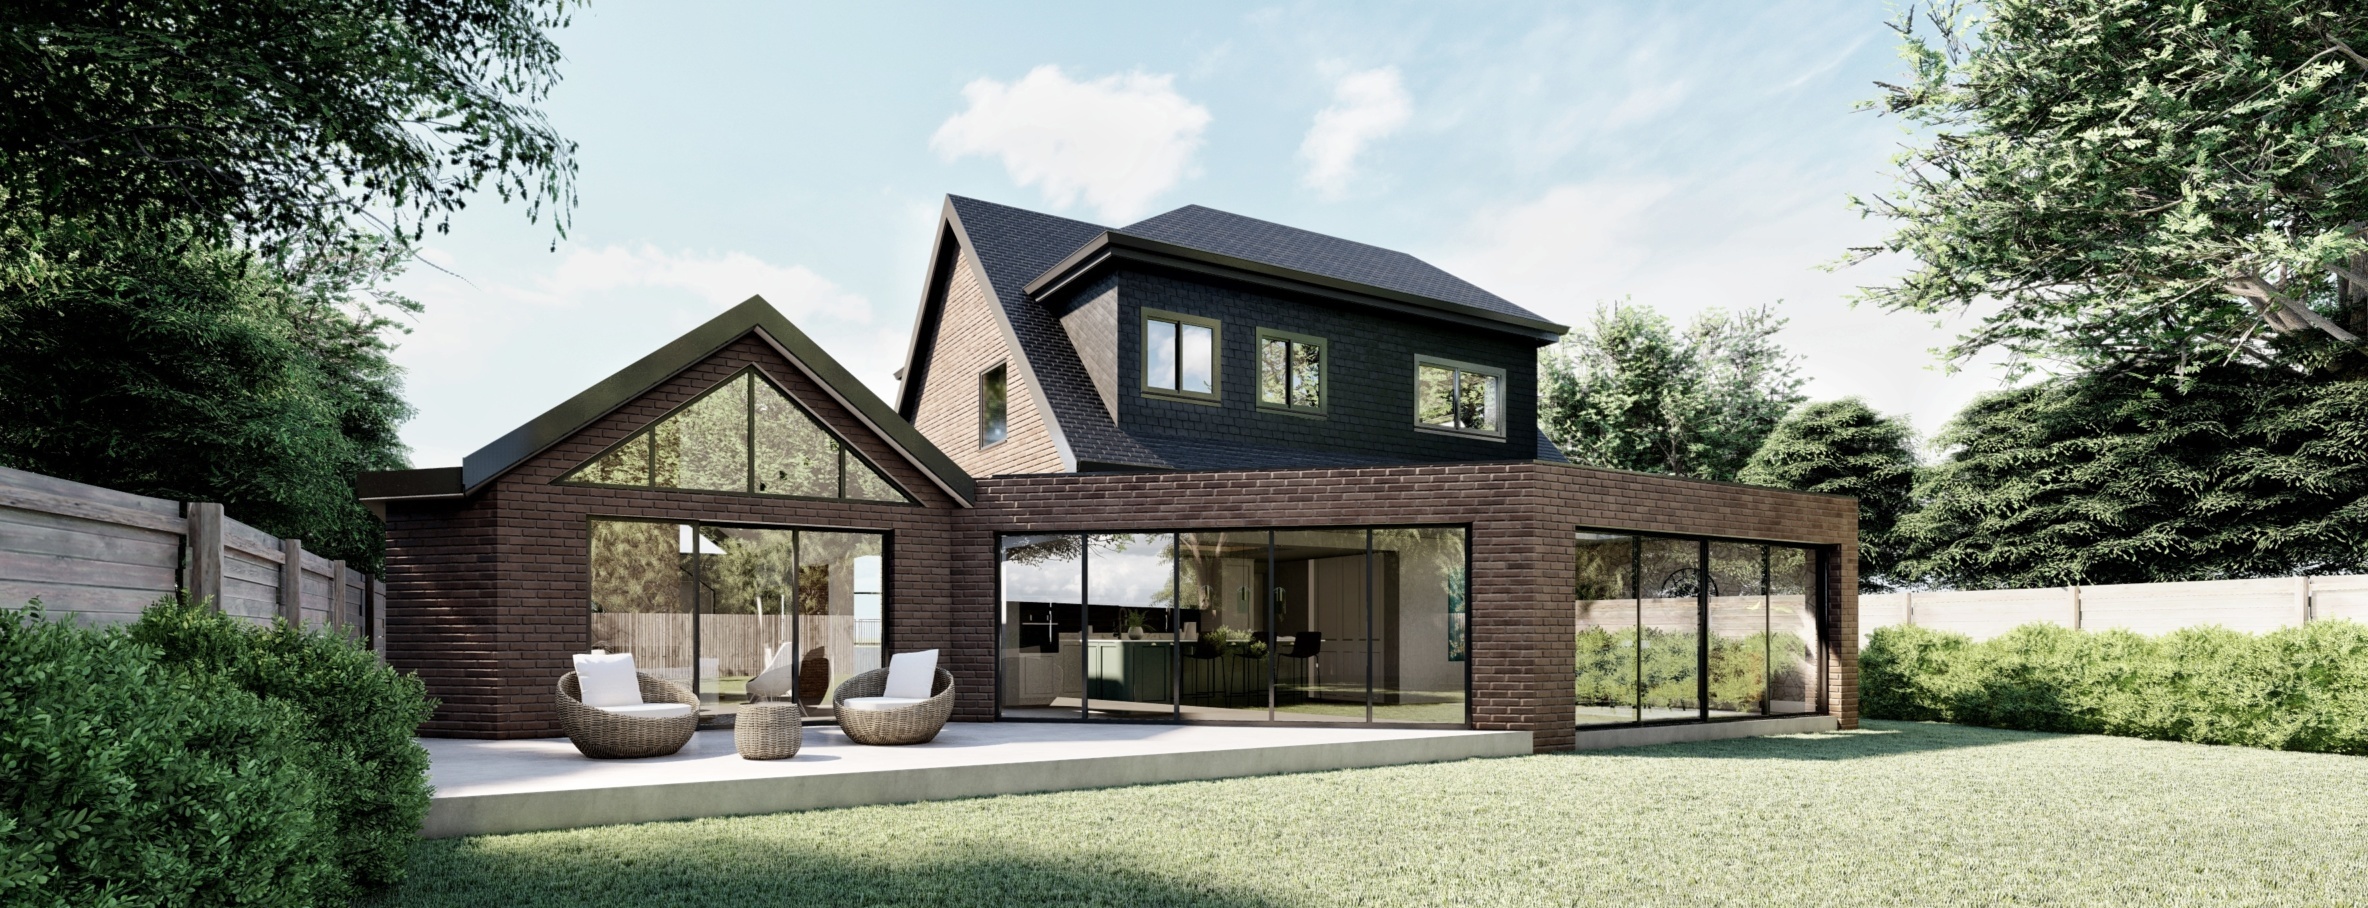 Claygate Architects